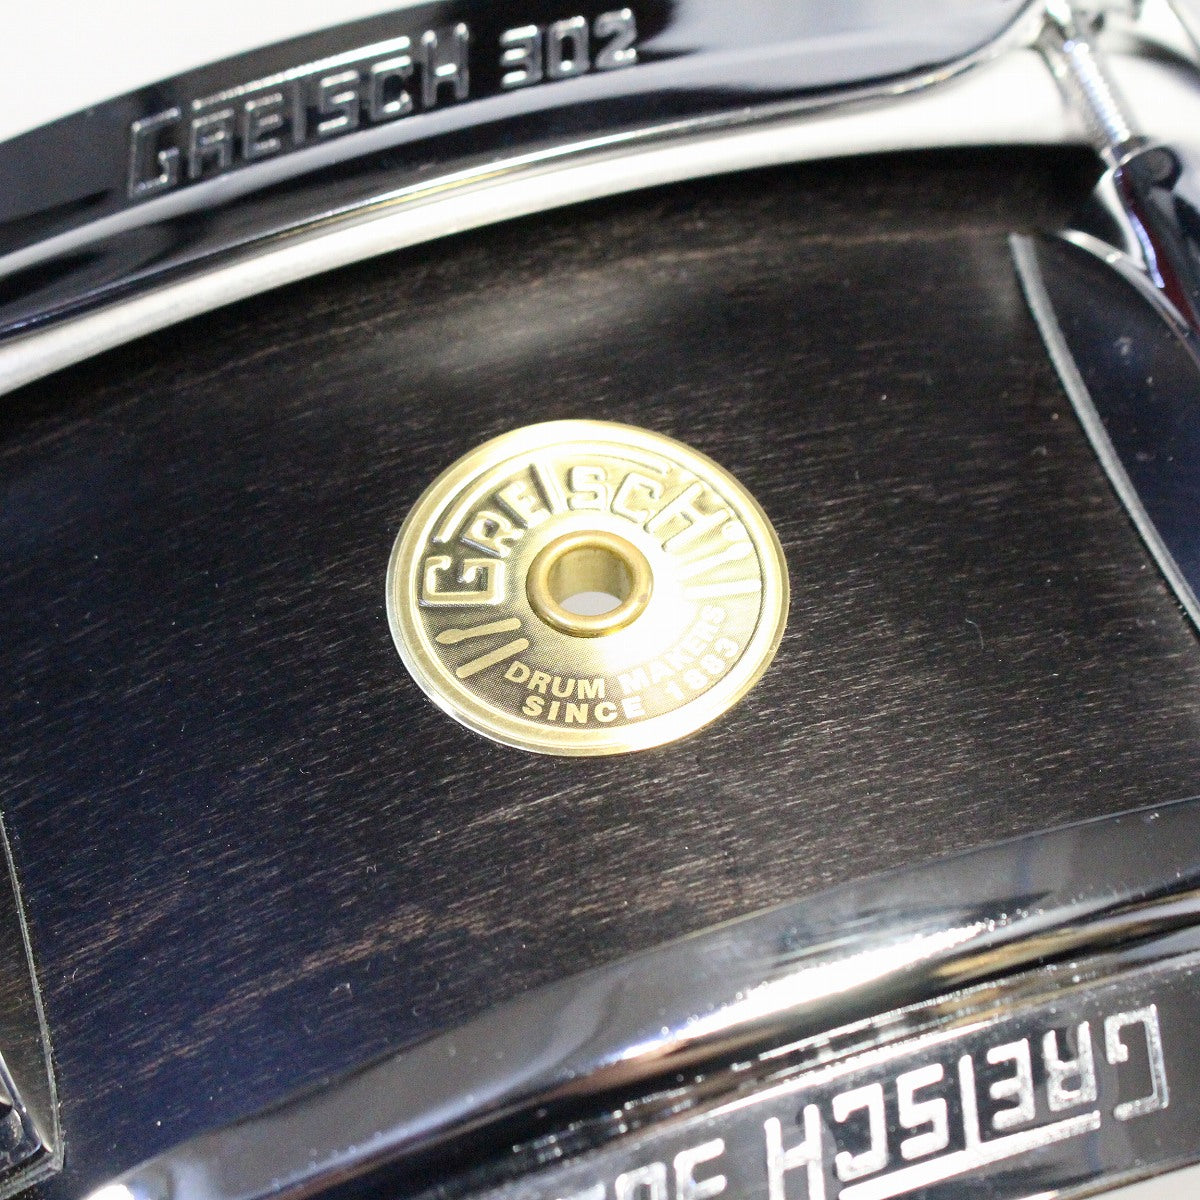 [SN 05801] USED GRETSCH / GKSL-0514S-8CL BROADKASTER 14x5 Gretsch Broadcaster Snare Drum [08]